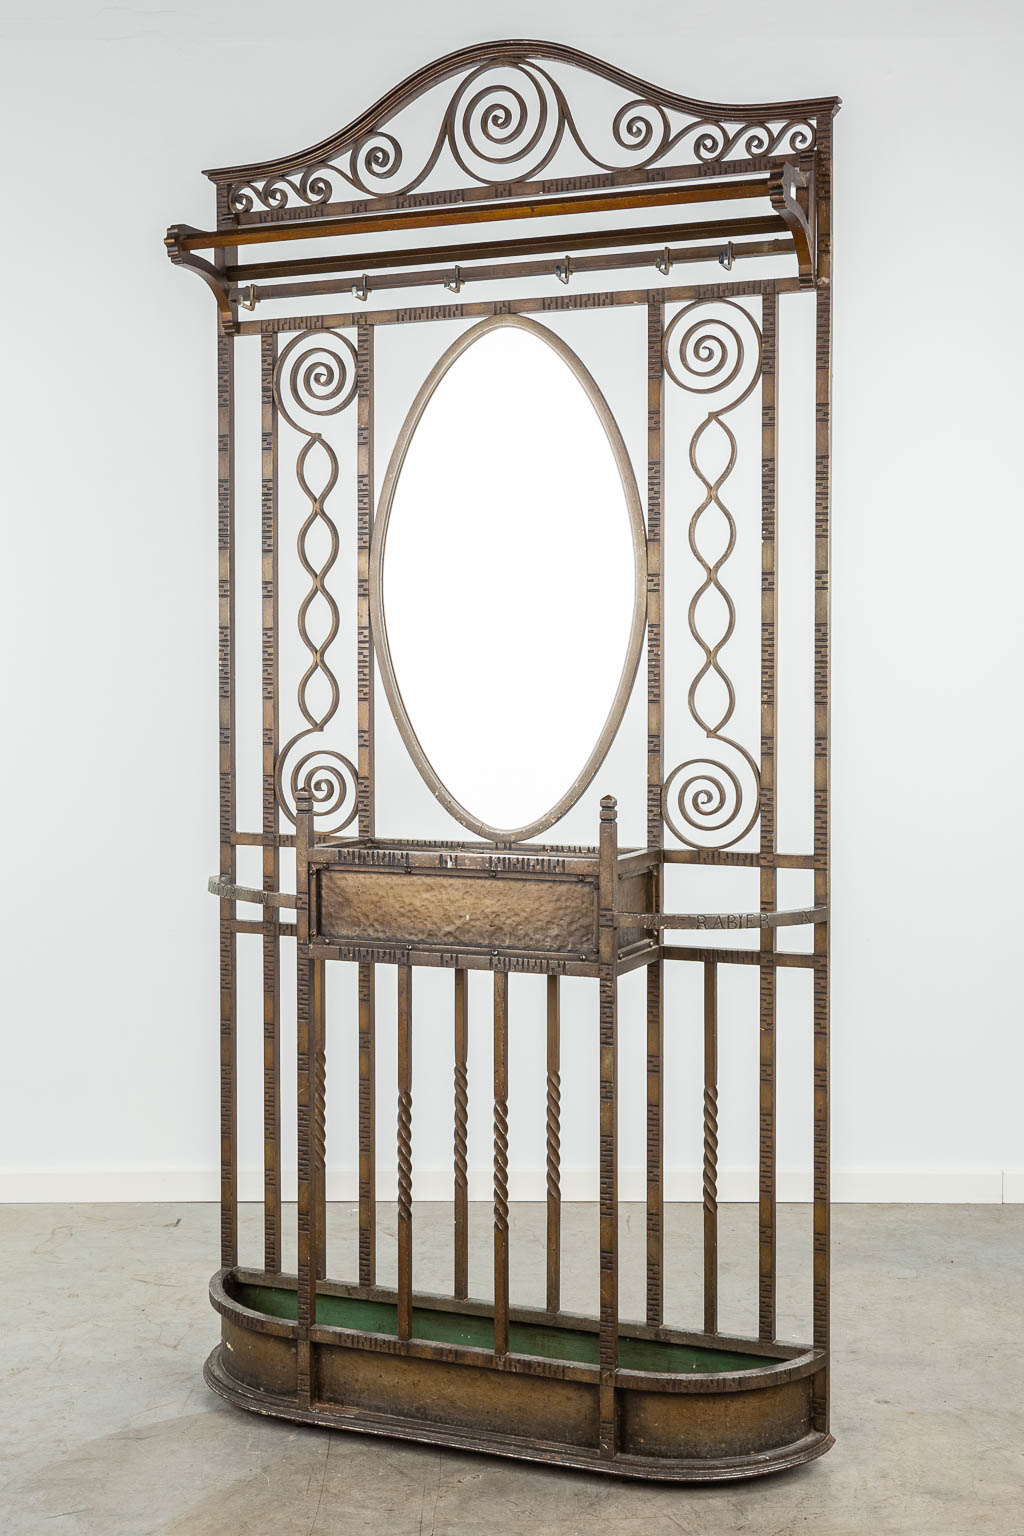 A coathanger and umbrella stand with mirror made of wrought iron and marked Victor Rabier. (H:208cm)